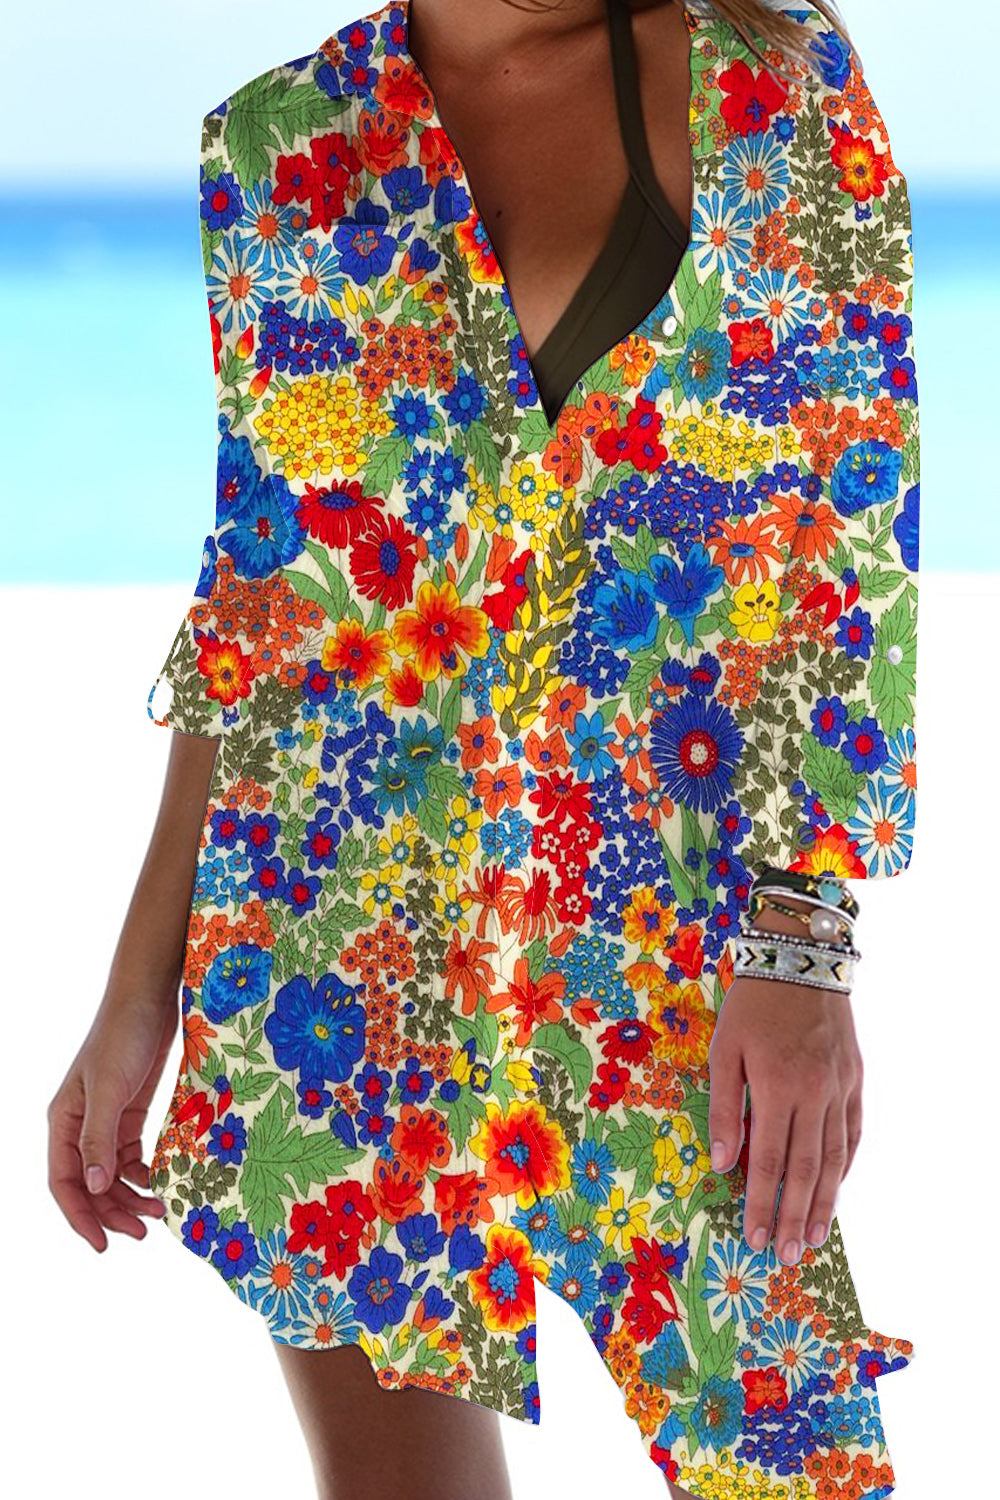 Beach Vacation Retro Idyllic Country Style Colorful Small Clusters Of Flowers Printed Patch Front Pockets Shirt